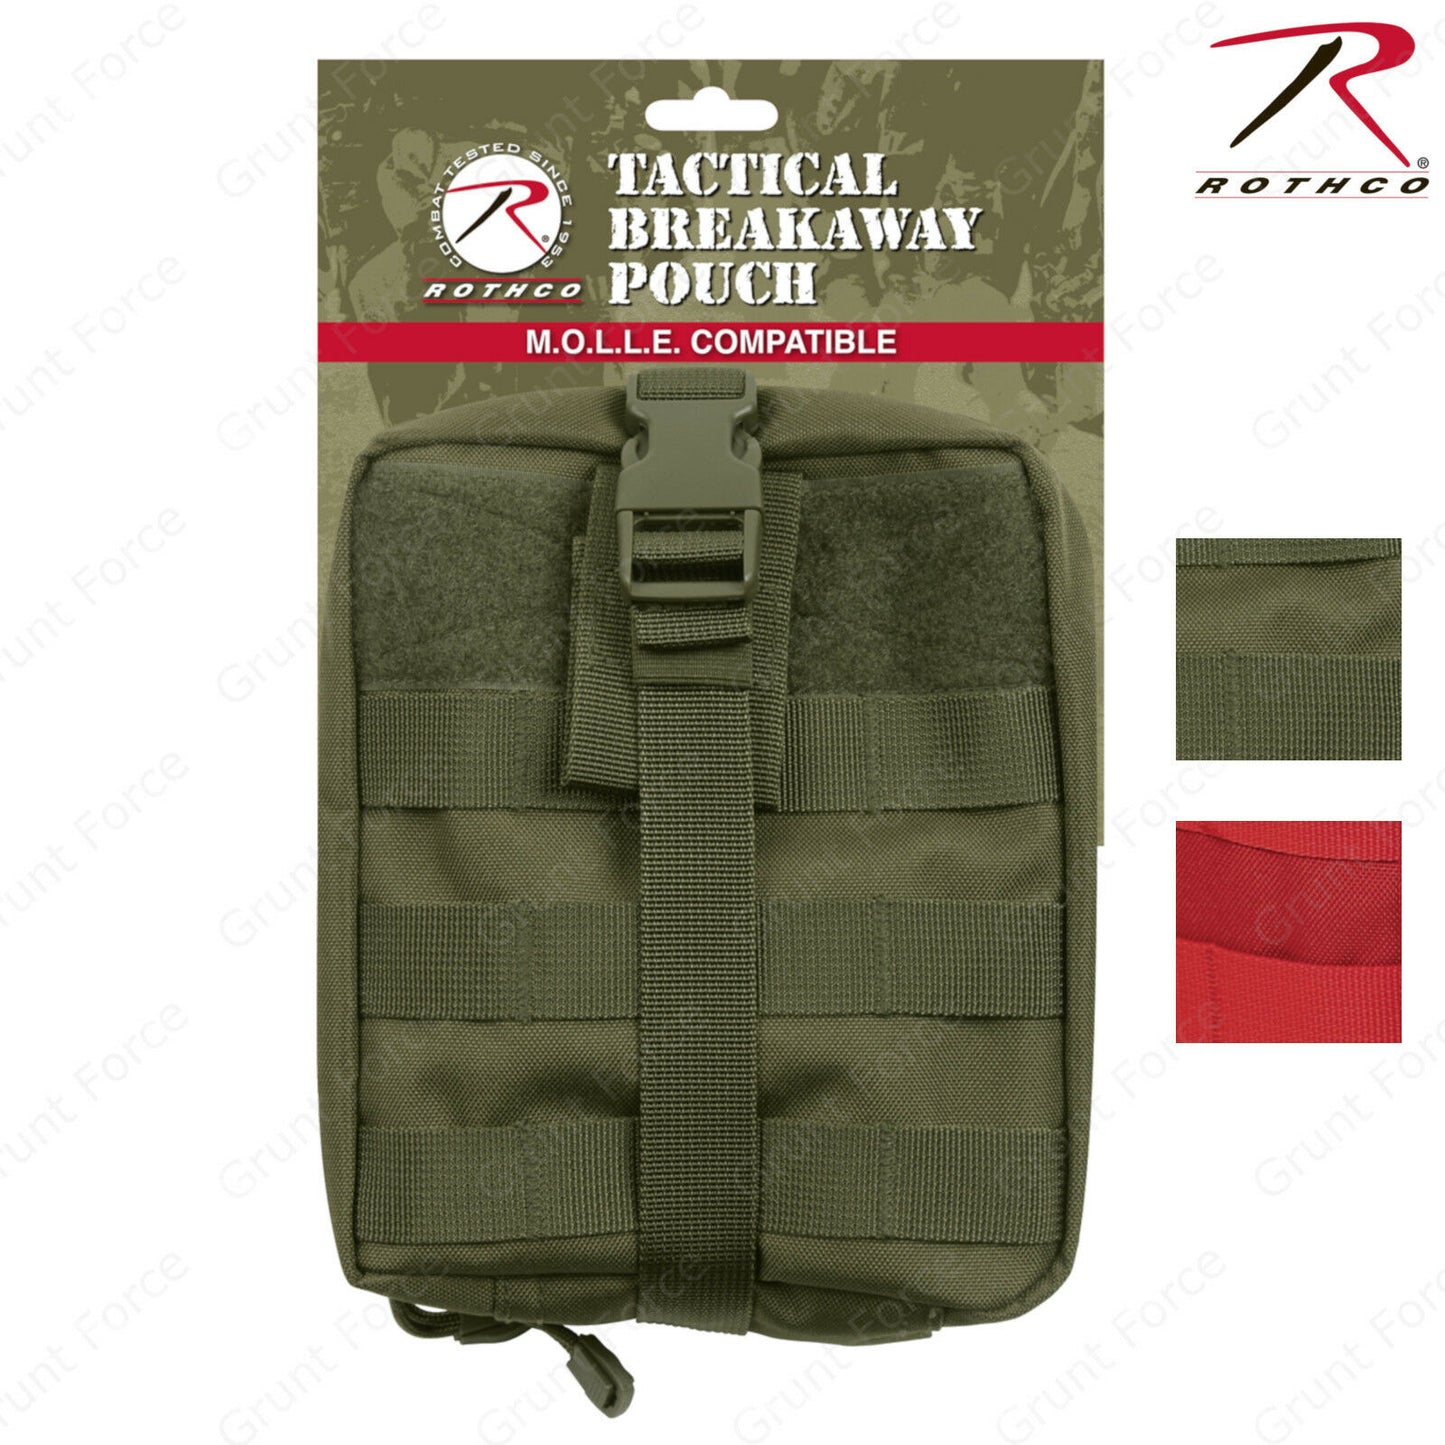 Rothco MOLLE Compatible Tactical Breakaway Medic Pouch In Red or Olive Drab